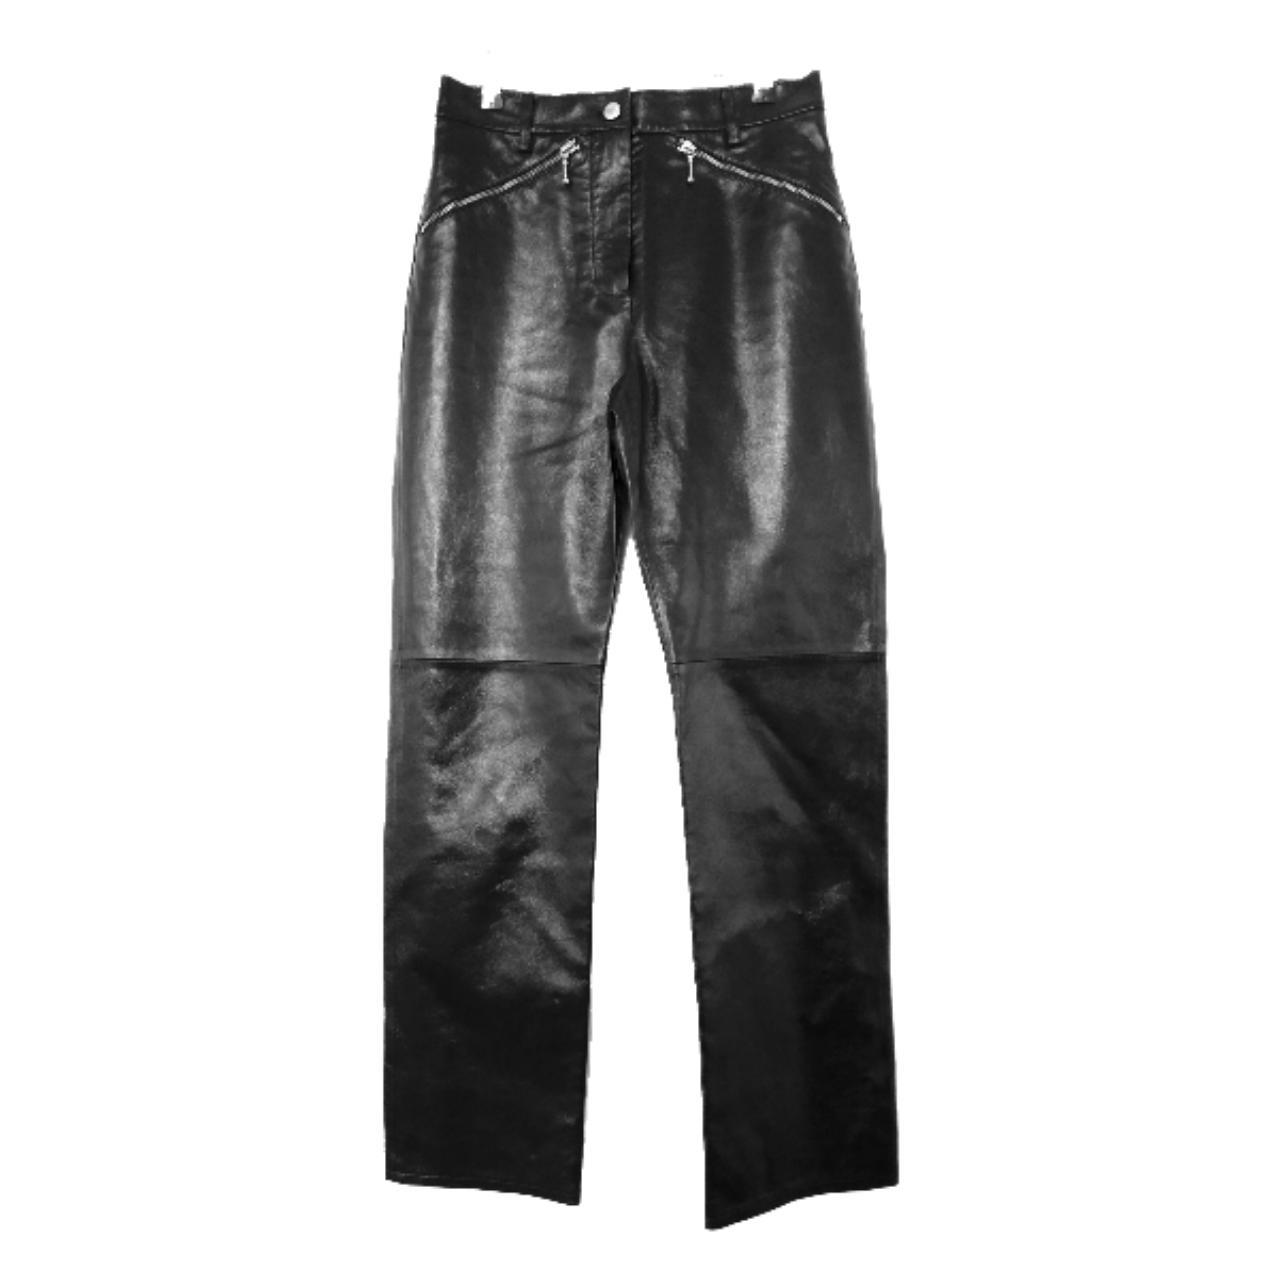 Punk inspired leather pants from Alexa Chung -... - Depop